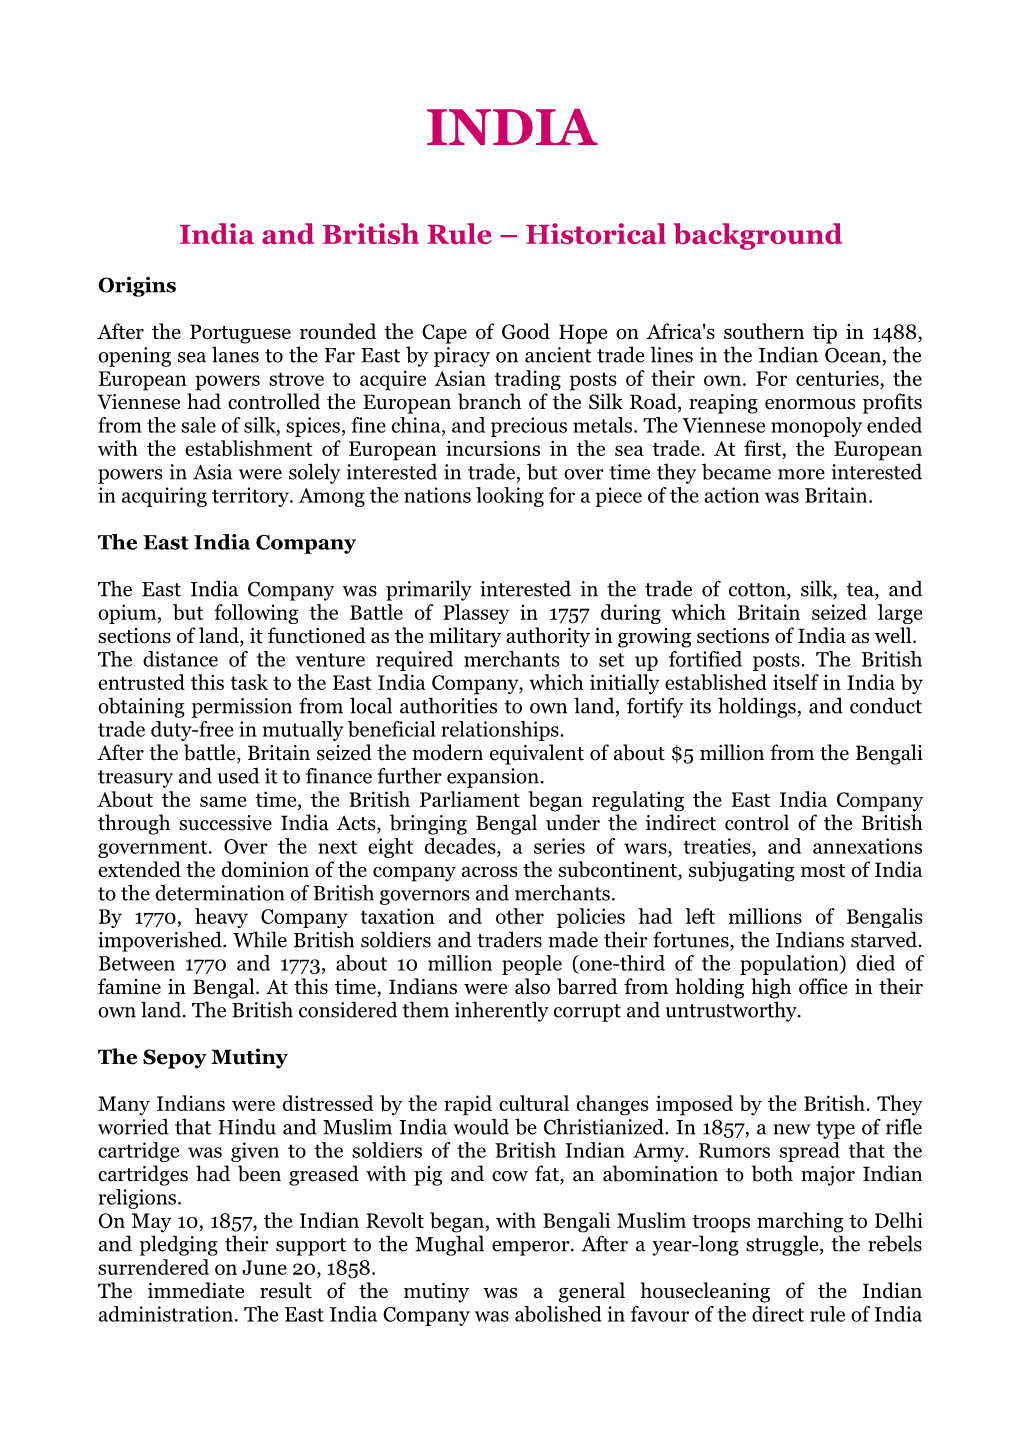 India and British Rule – Historical Background